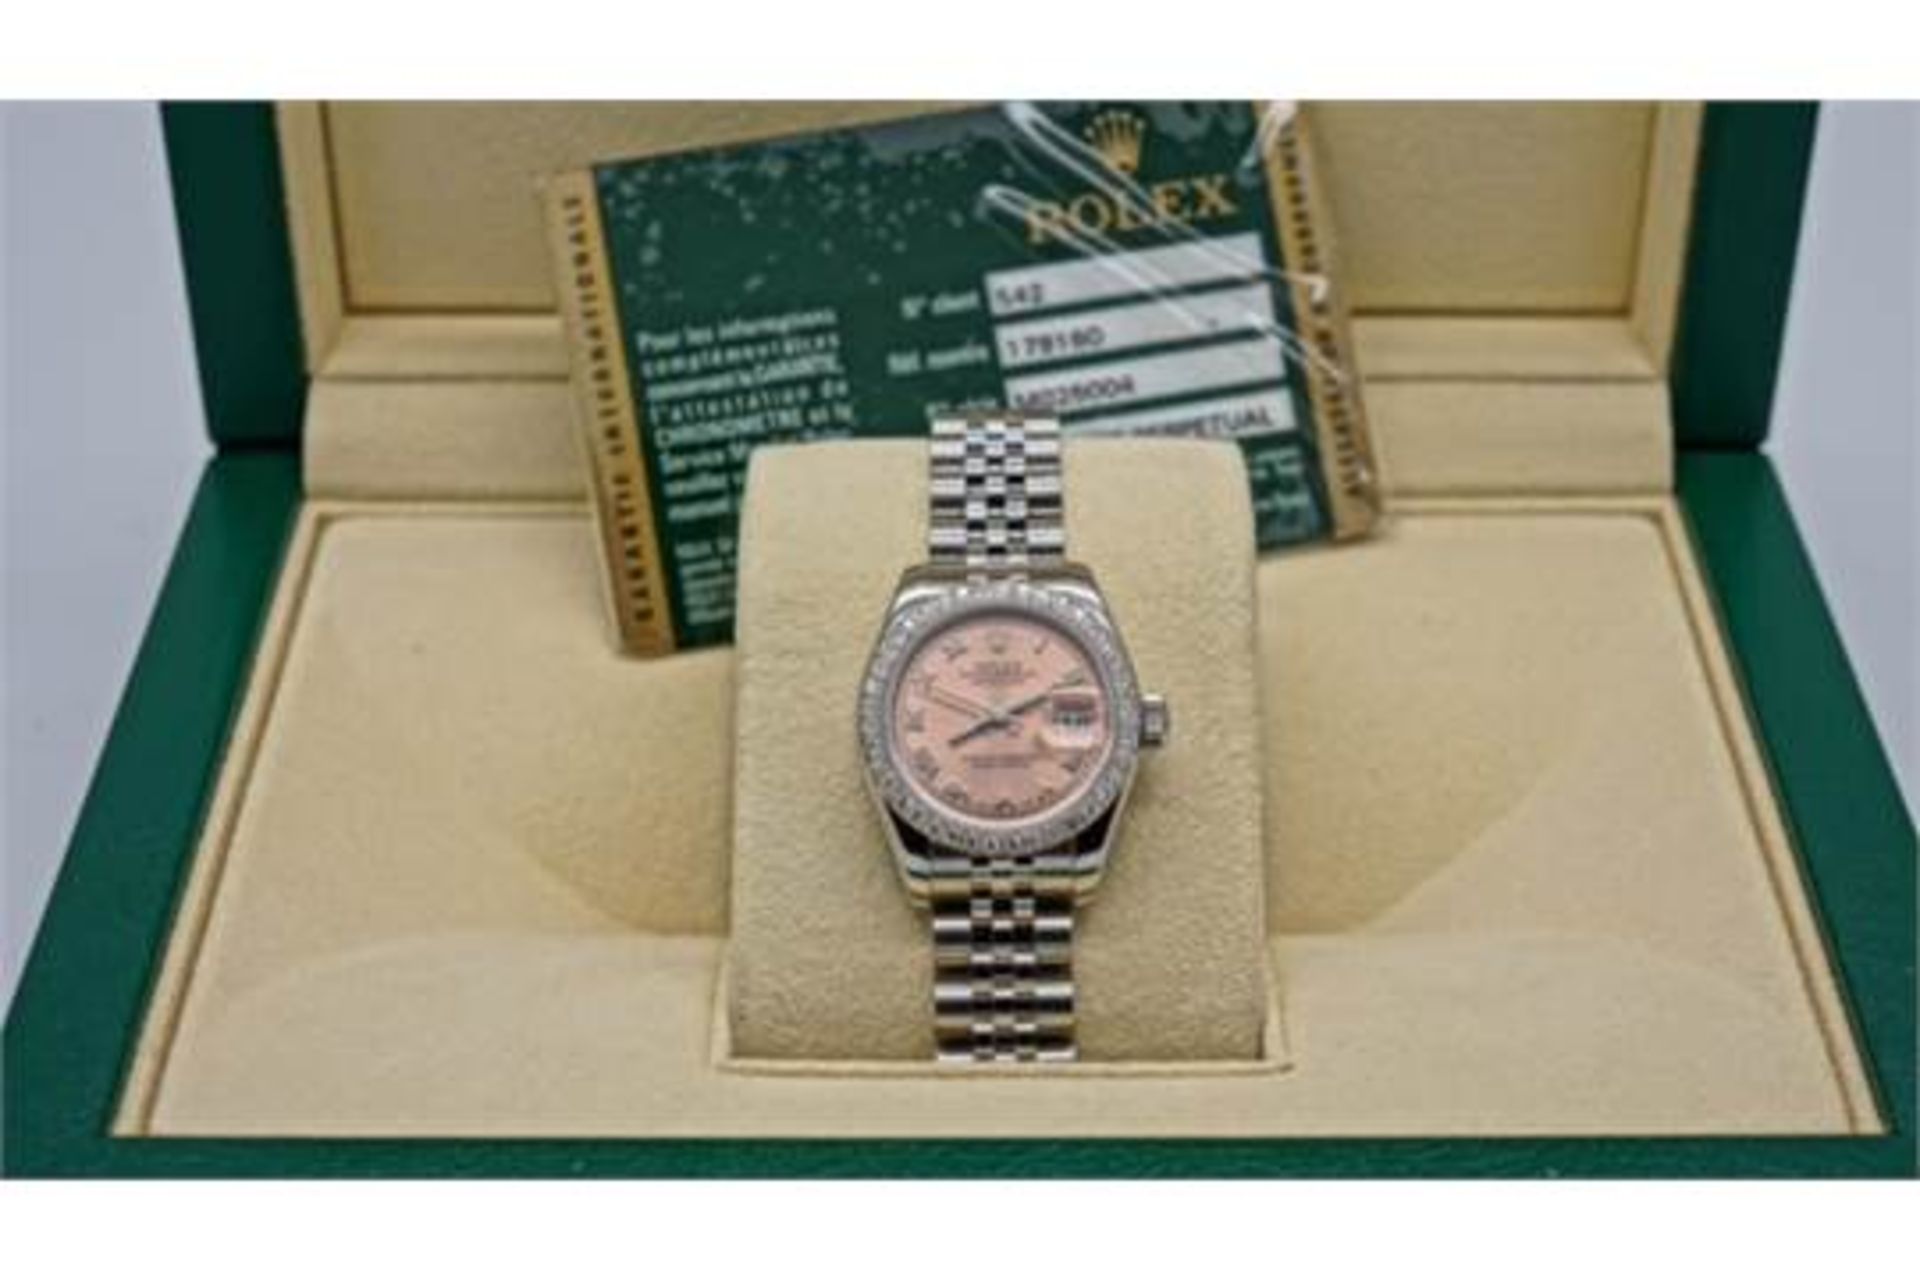 ROLEX STEEL LADIES DATE JUST WITH AFTERSET DIAMOND BEZEL, PINK ROMAN NUMERAL DIAL ON JUBILEE STRAP - Image 2 of 2